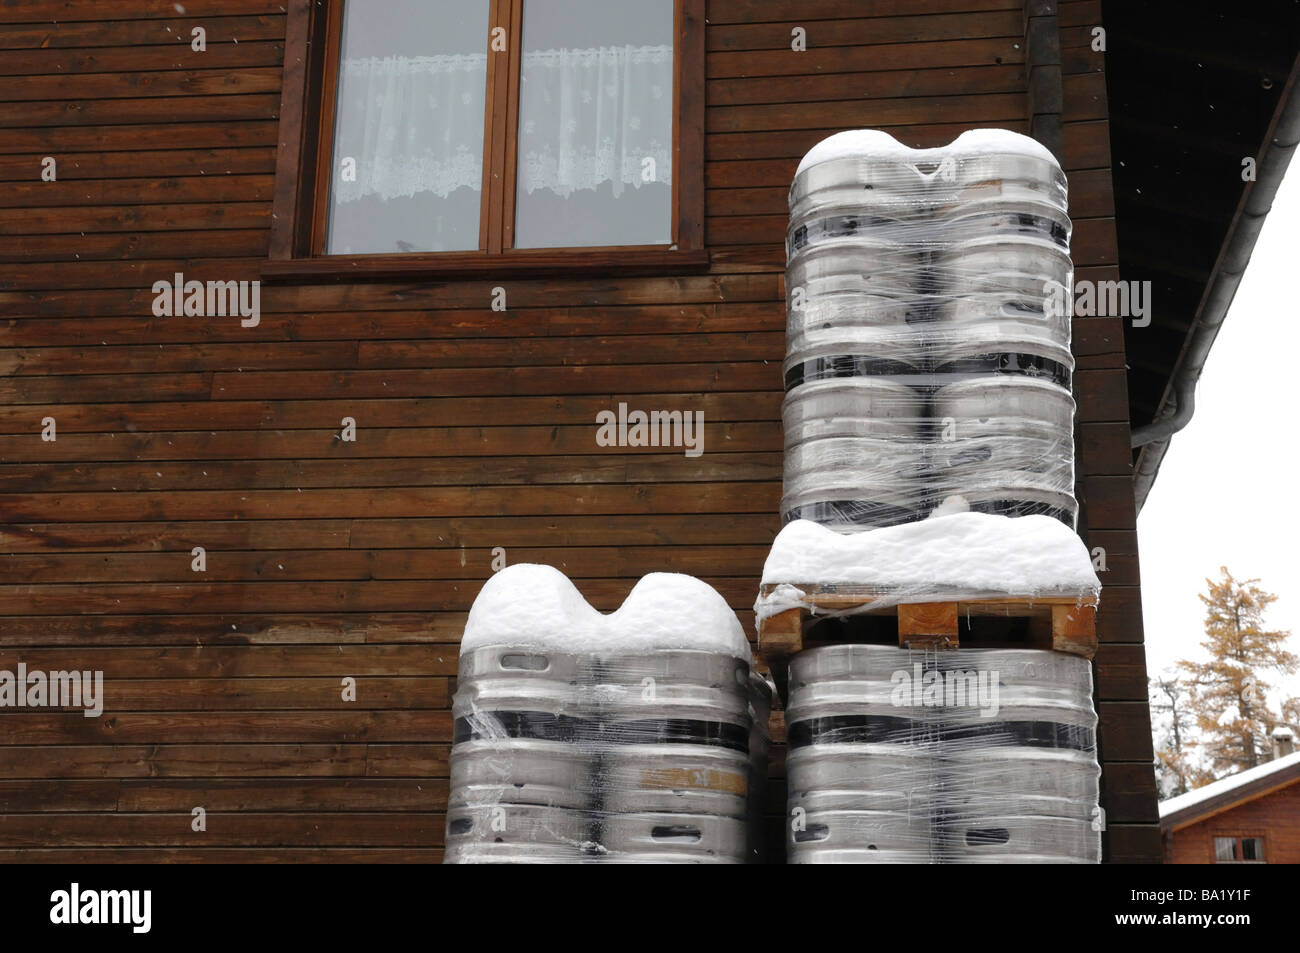 Beer barrels coered in fresh snow outside a traditional wooden bar in the Swiss Alps Stock Photo